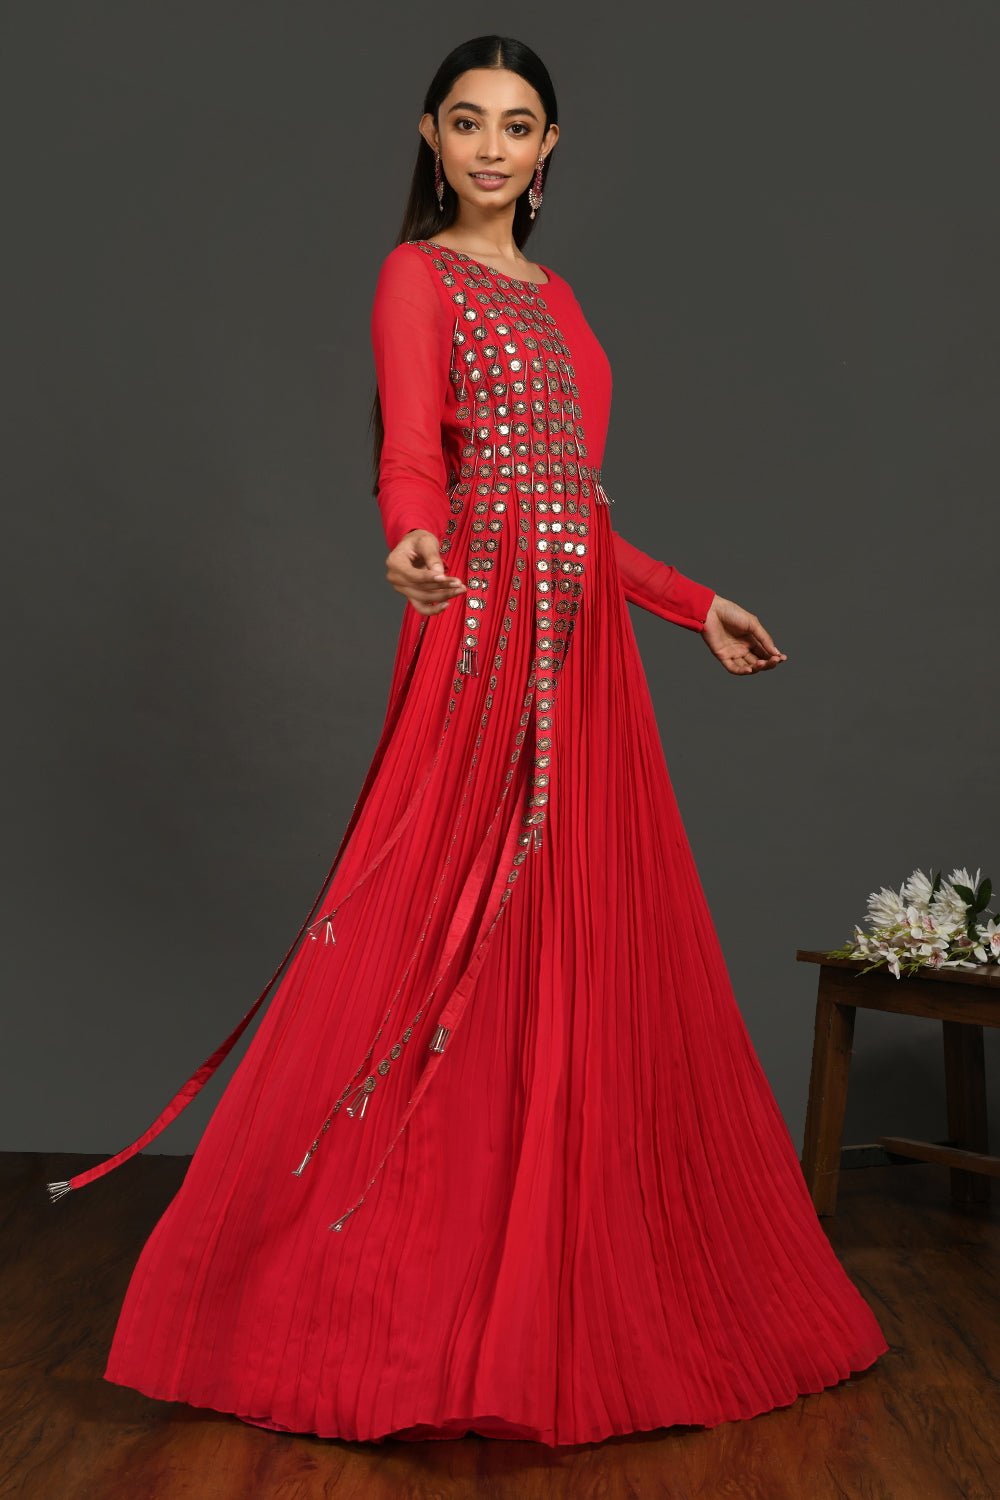 Gowns - Upto 50% to 80% OFF on Indian Gowns Designs Online at Best Prices  In India | Flipkart.com